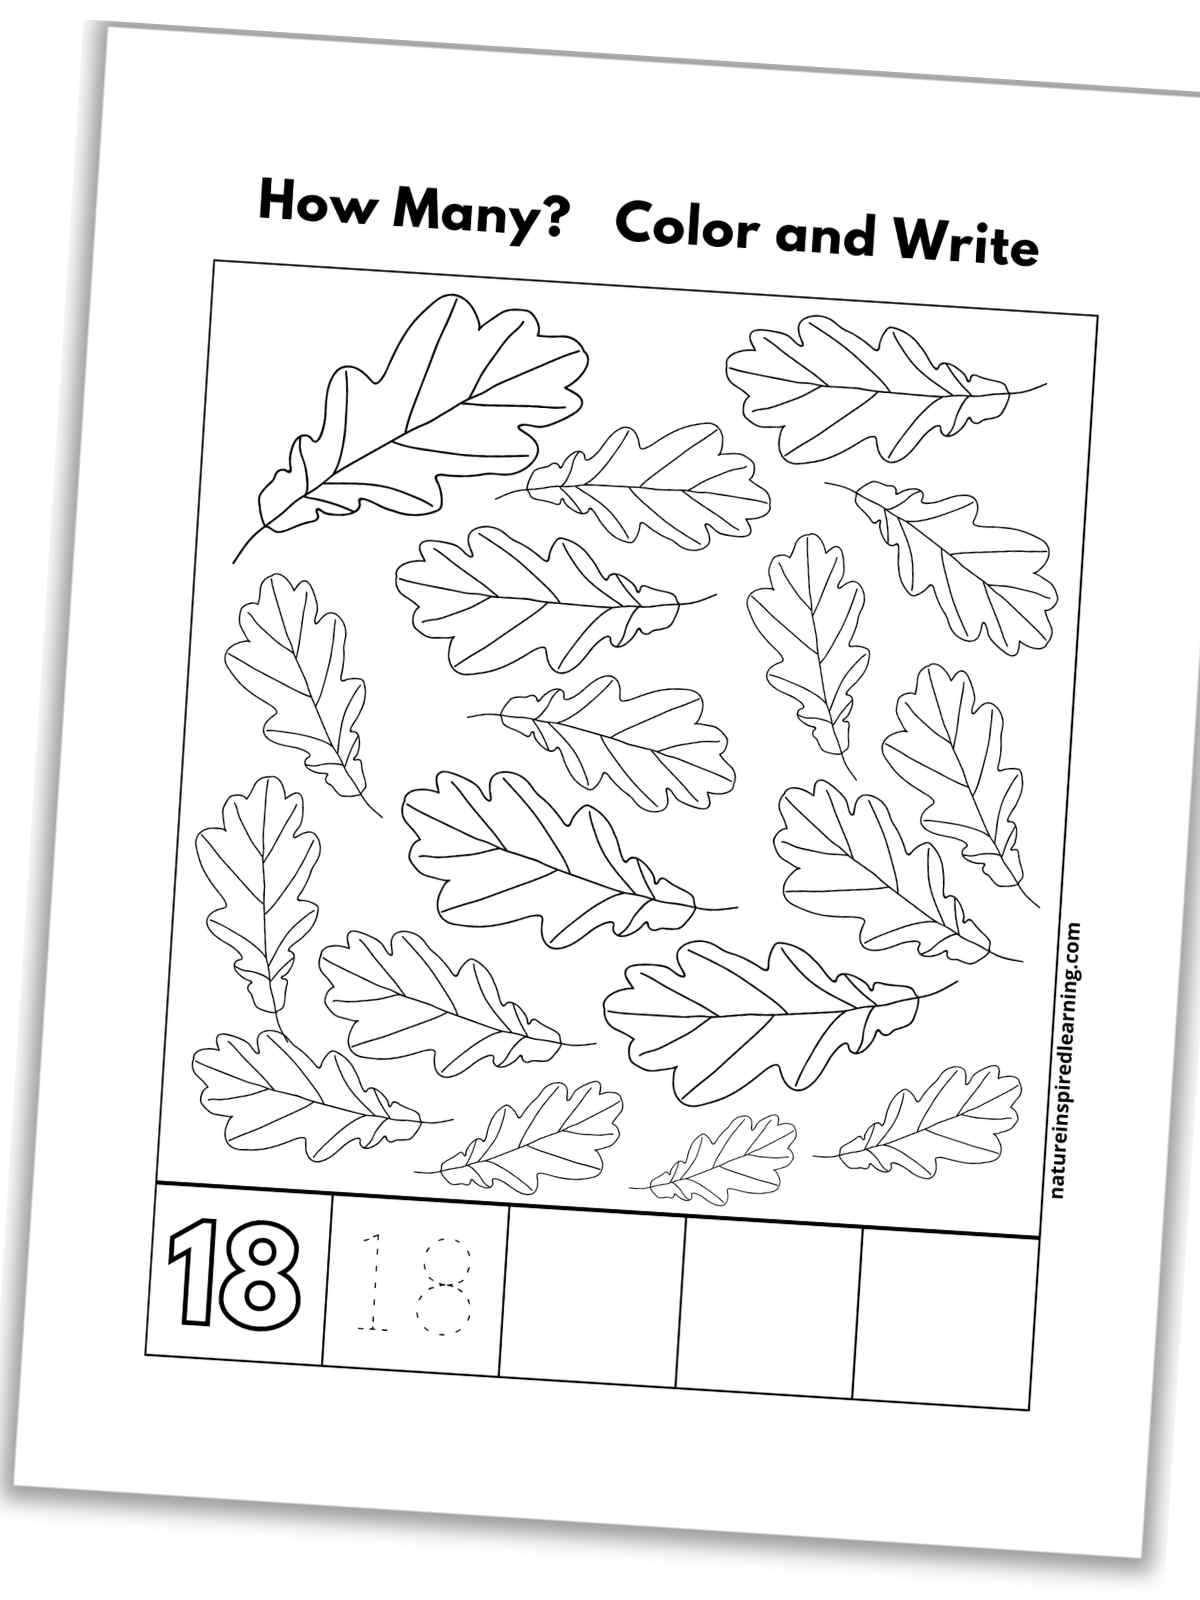 black and white number eighteen worksheet with leaves, outline of number 18, a traceable 18, and blank boxes slanted with a drop shadow